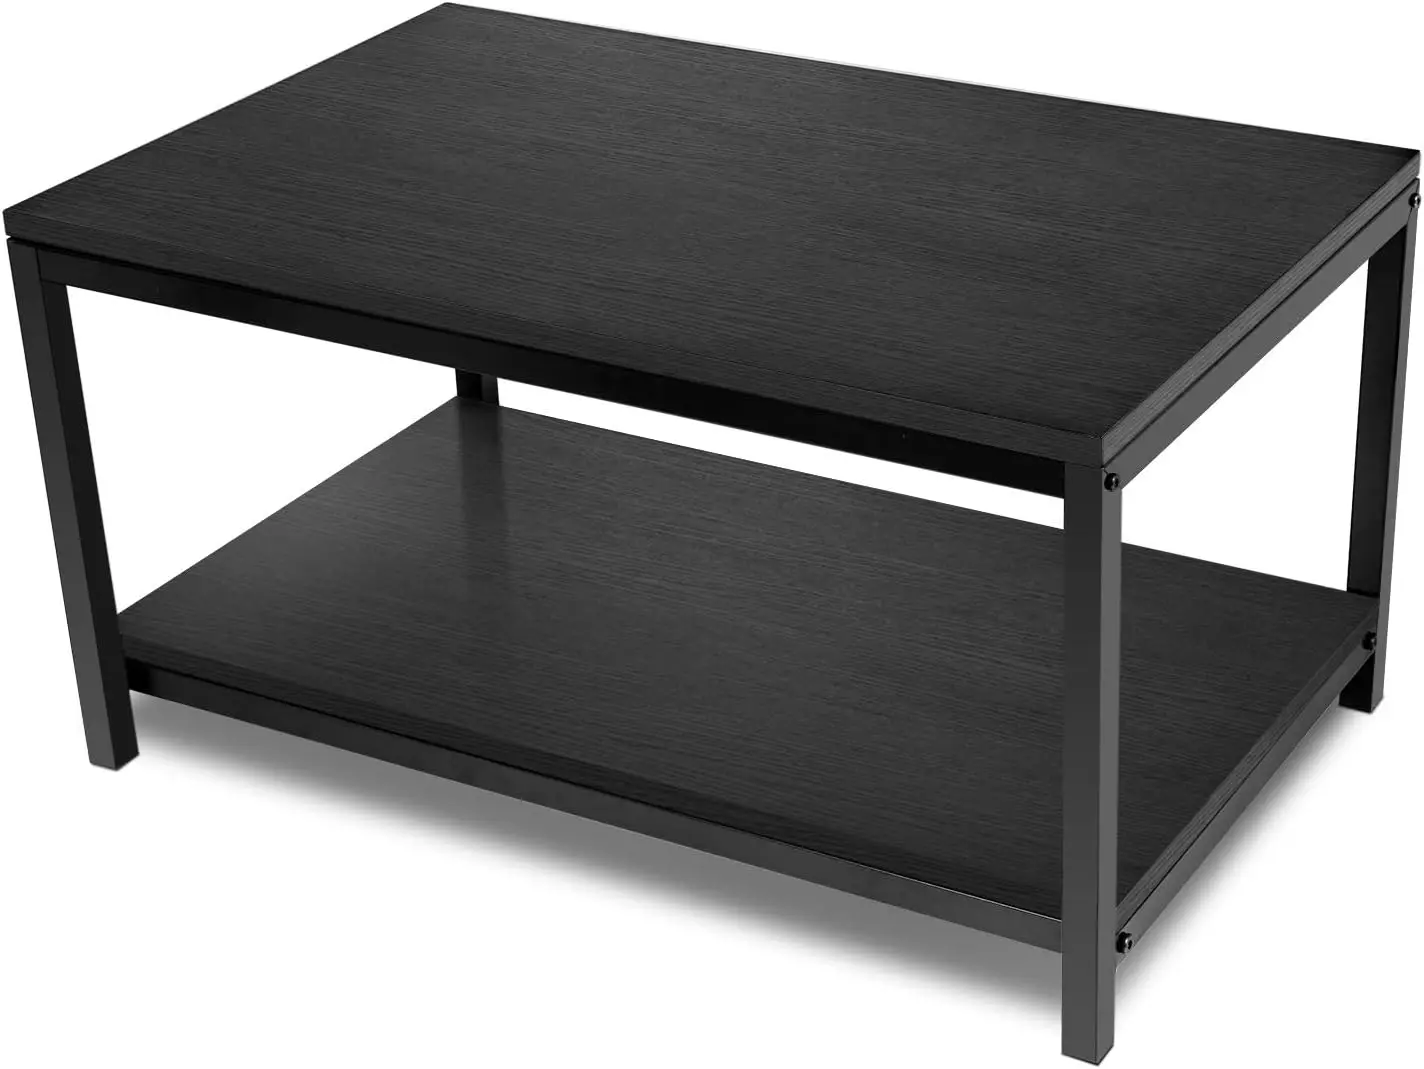 Shelf for Living Room and Office, Easy Assembly, Black (Home Coffee Table), 31x20x16 inch Funny indoor outdoor plant holders Por